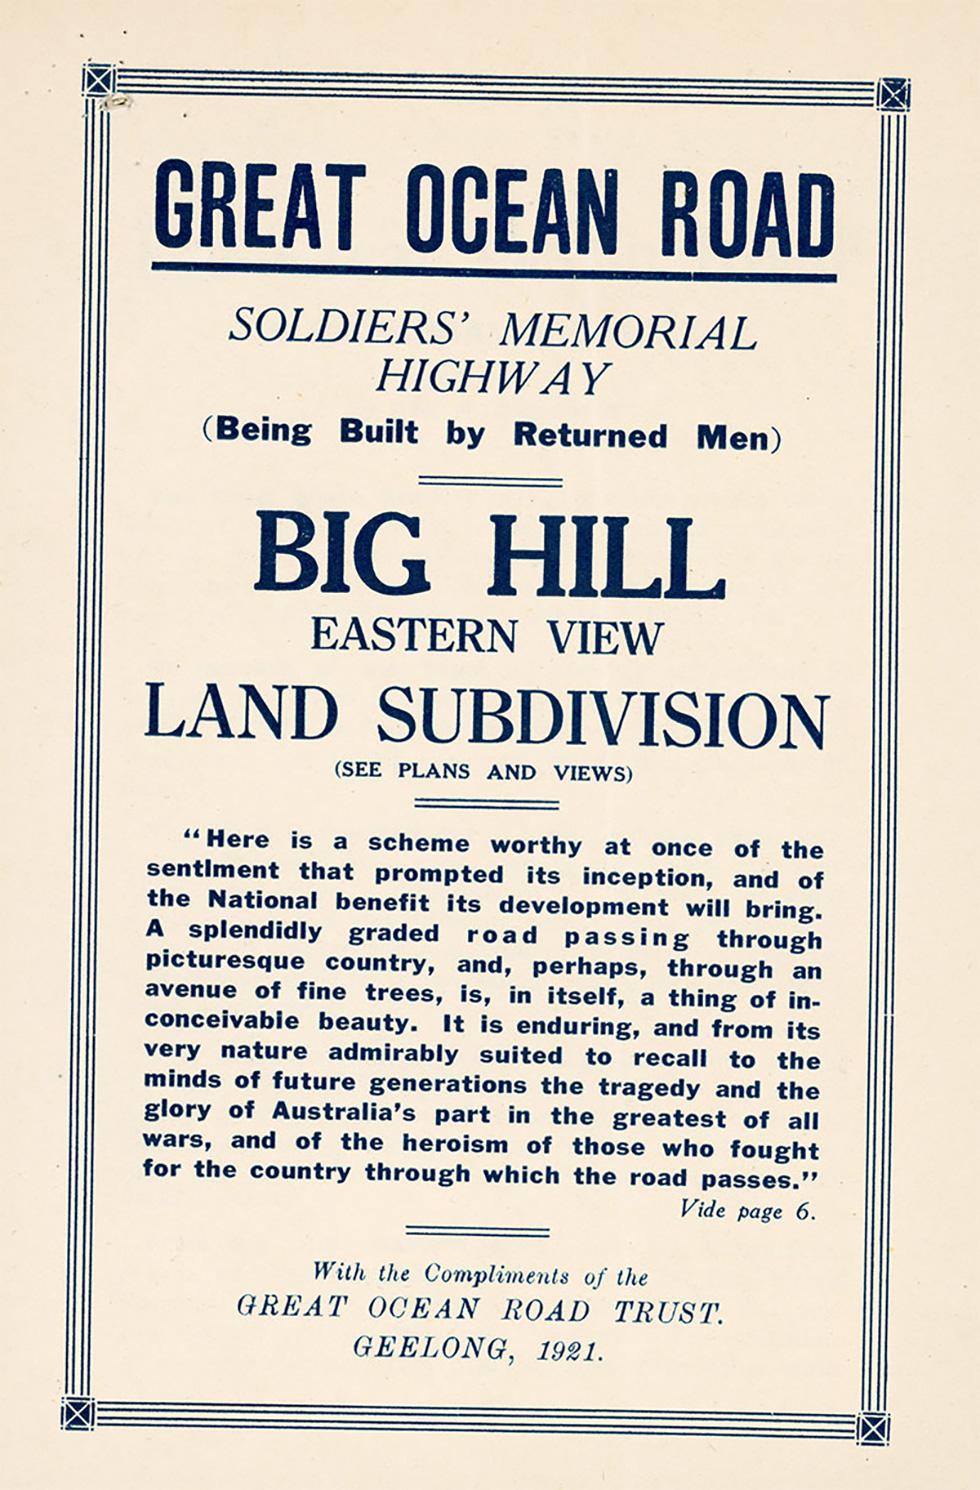 A brochure for the soldiers' memorial highway on the Great Ocean Road, Victoria.